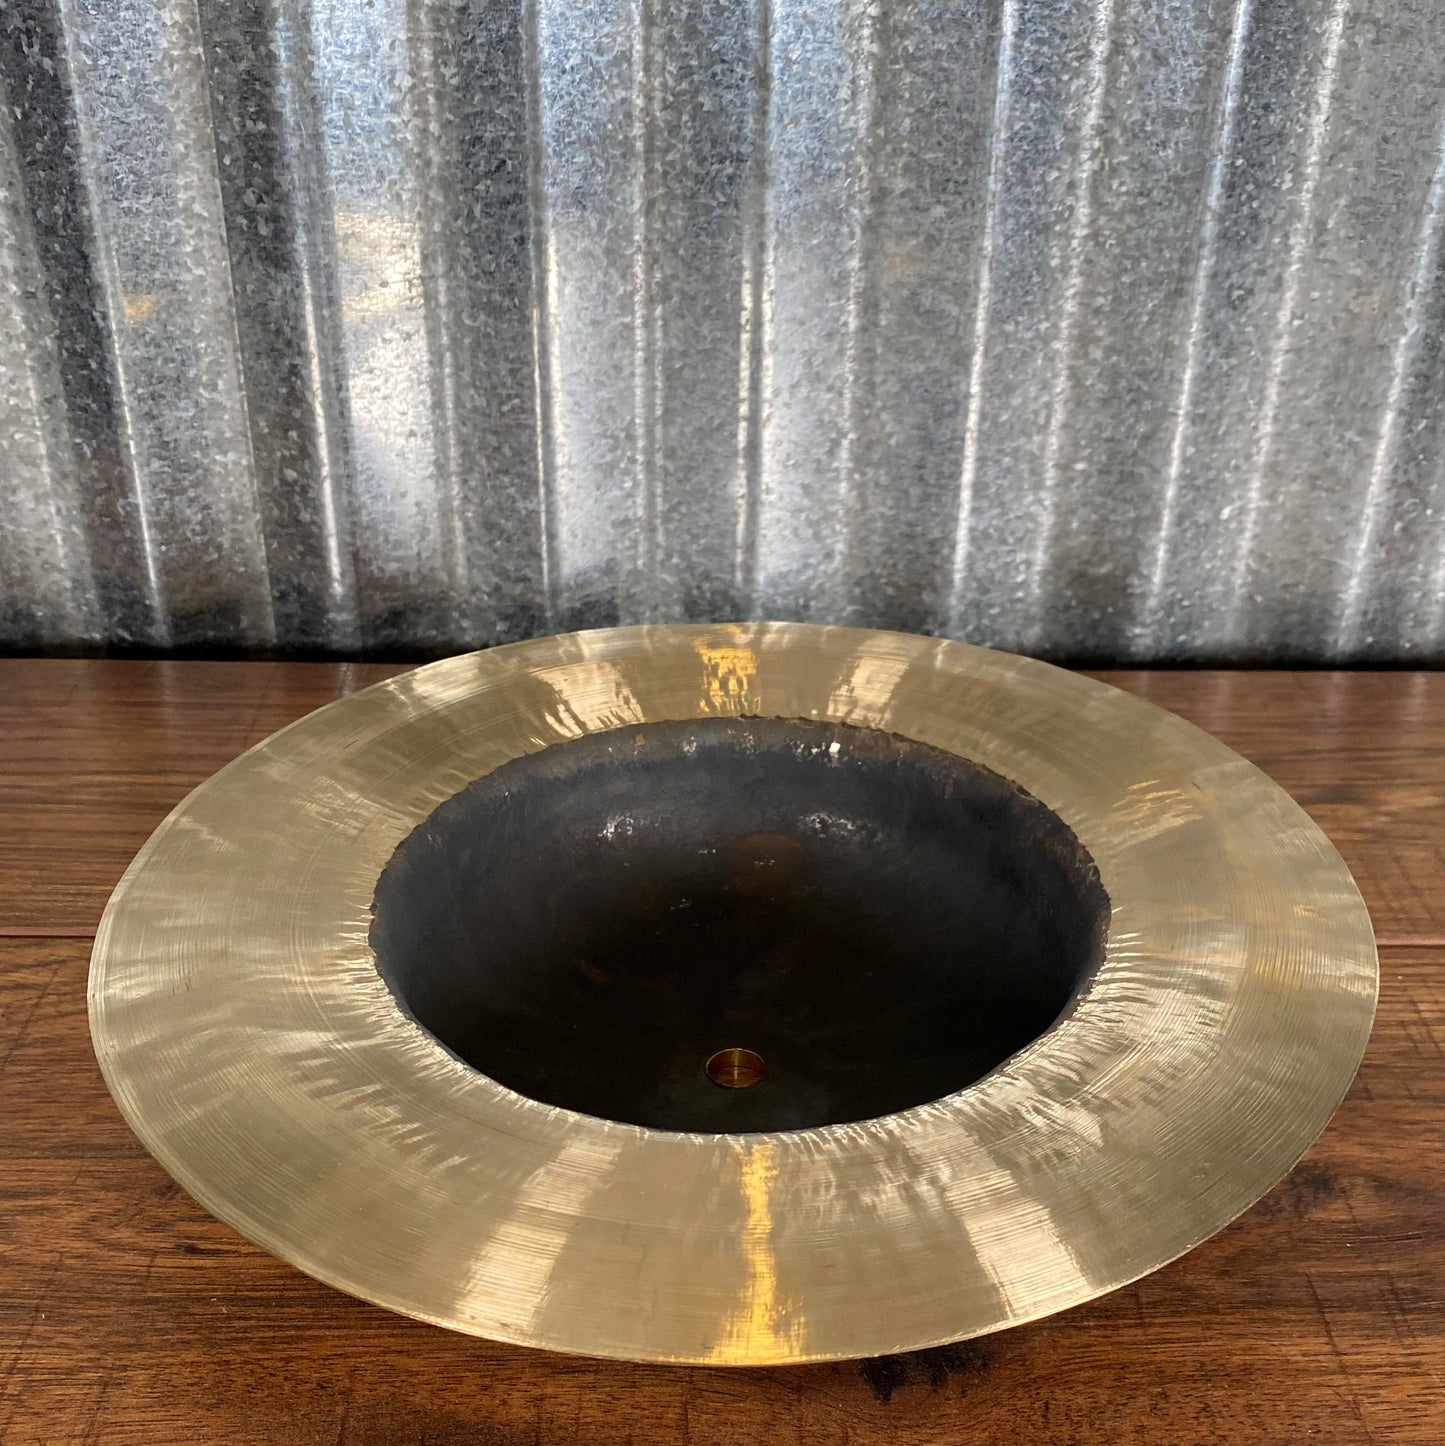 Dream Cymbals REFX-HAN10 Recycled RE-FX Han Effect 10" Cymbal